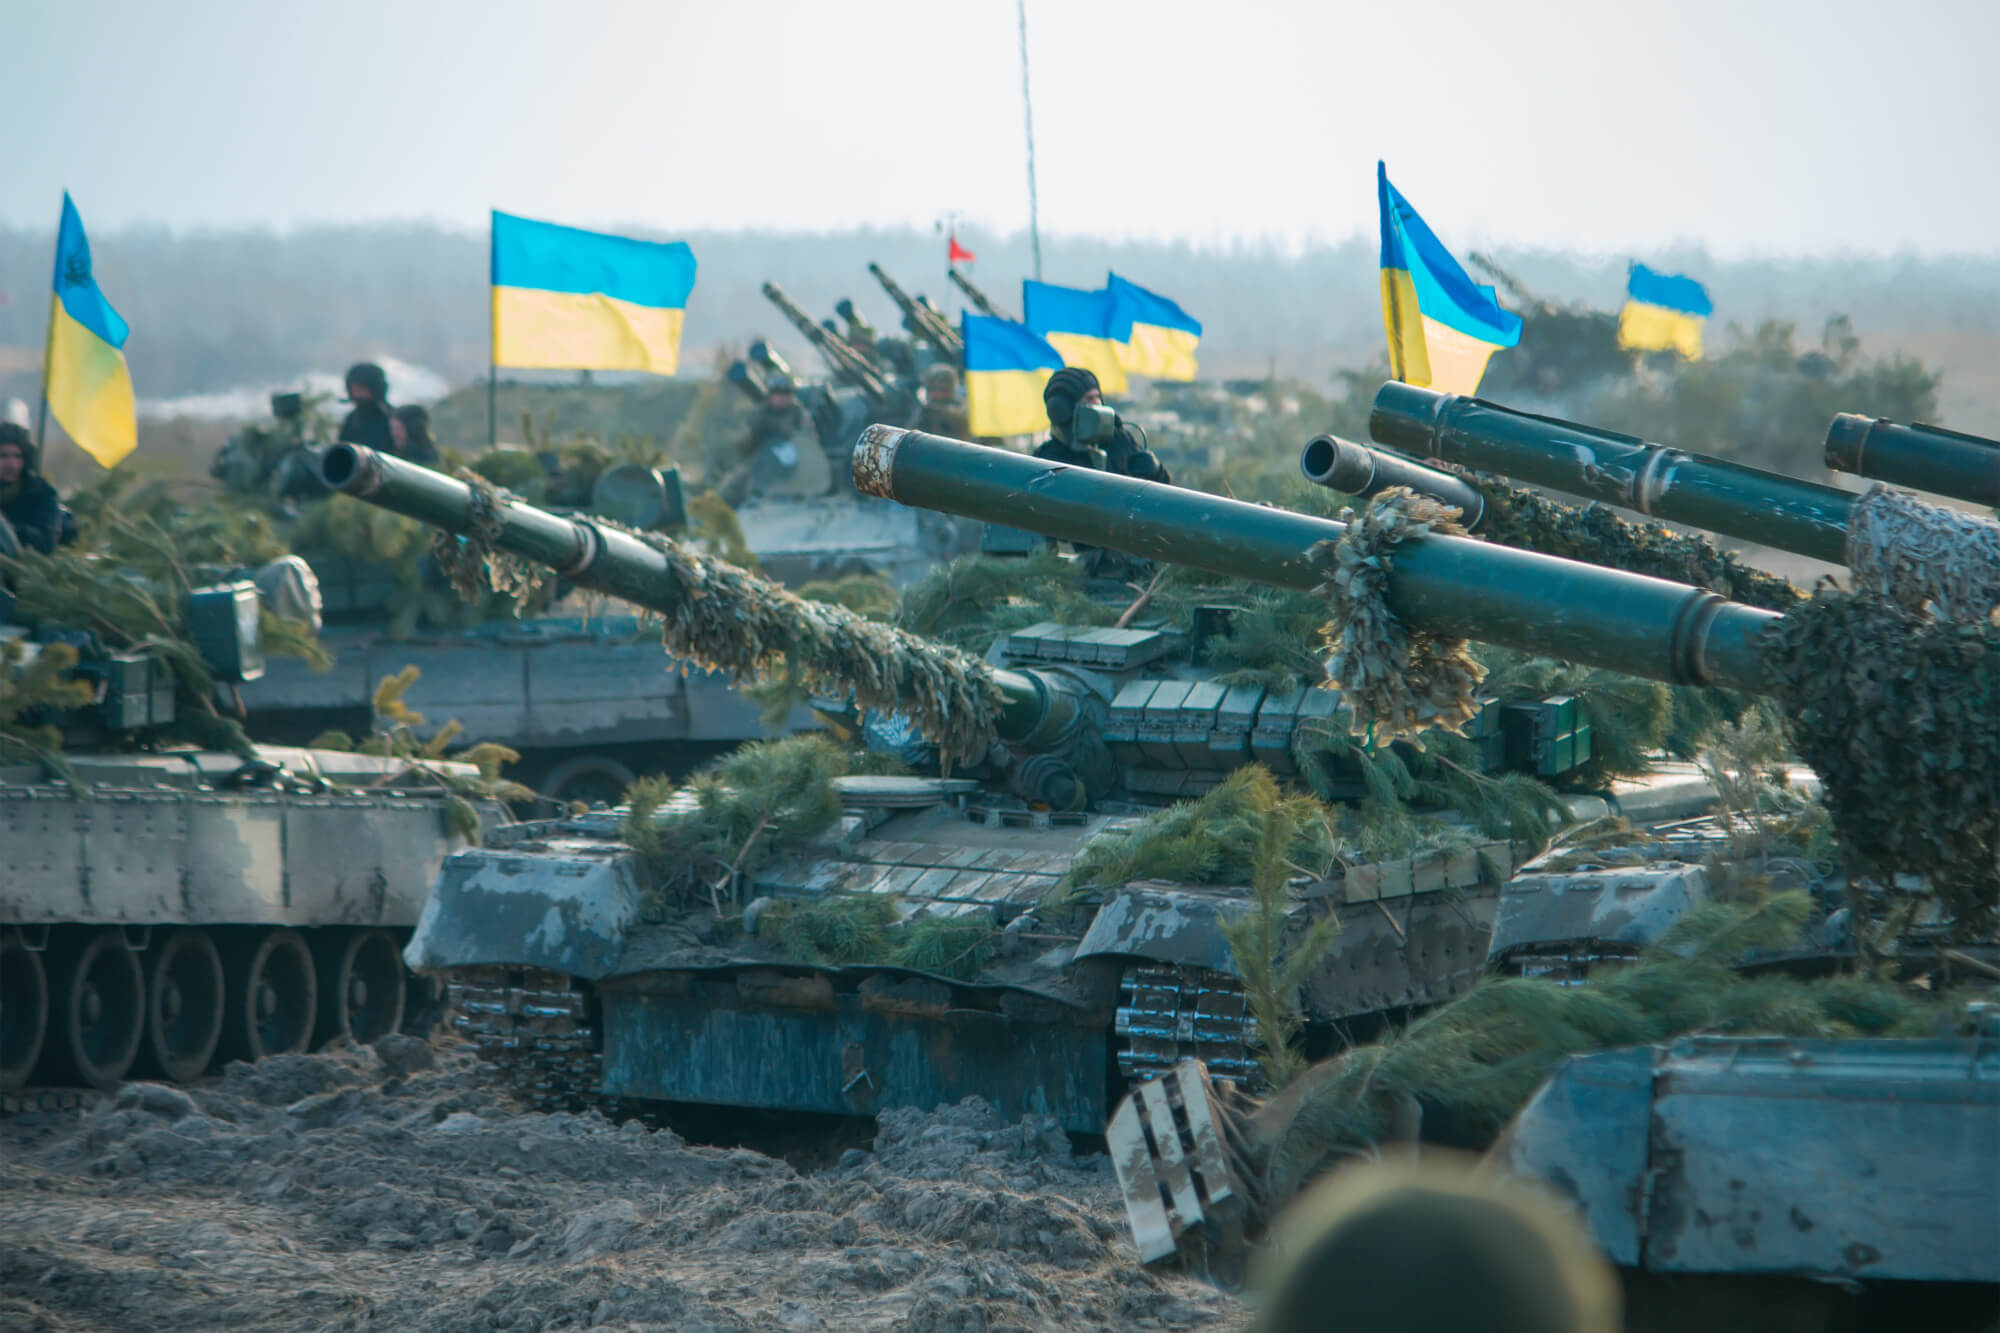 Ukrainian armoured vehicles during a military parade in 2018